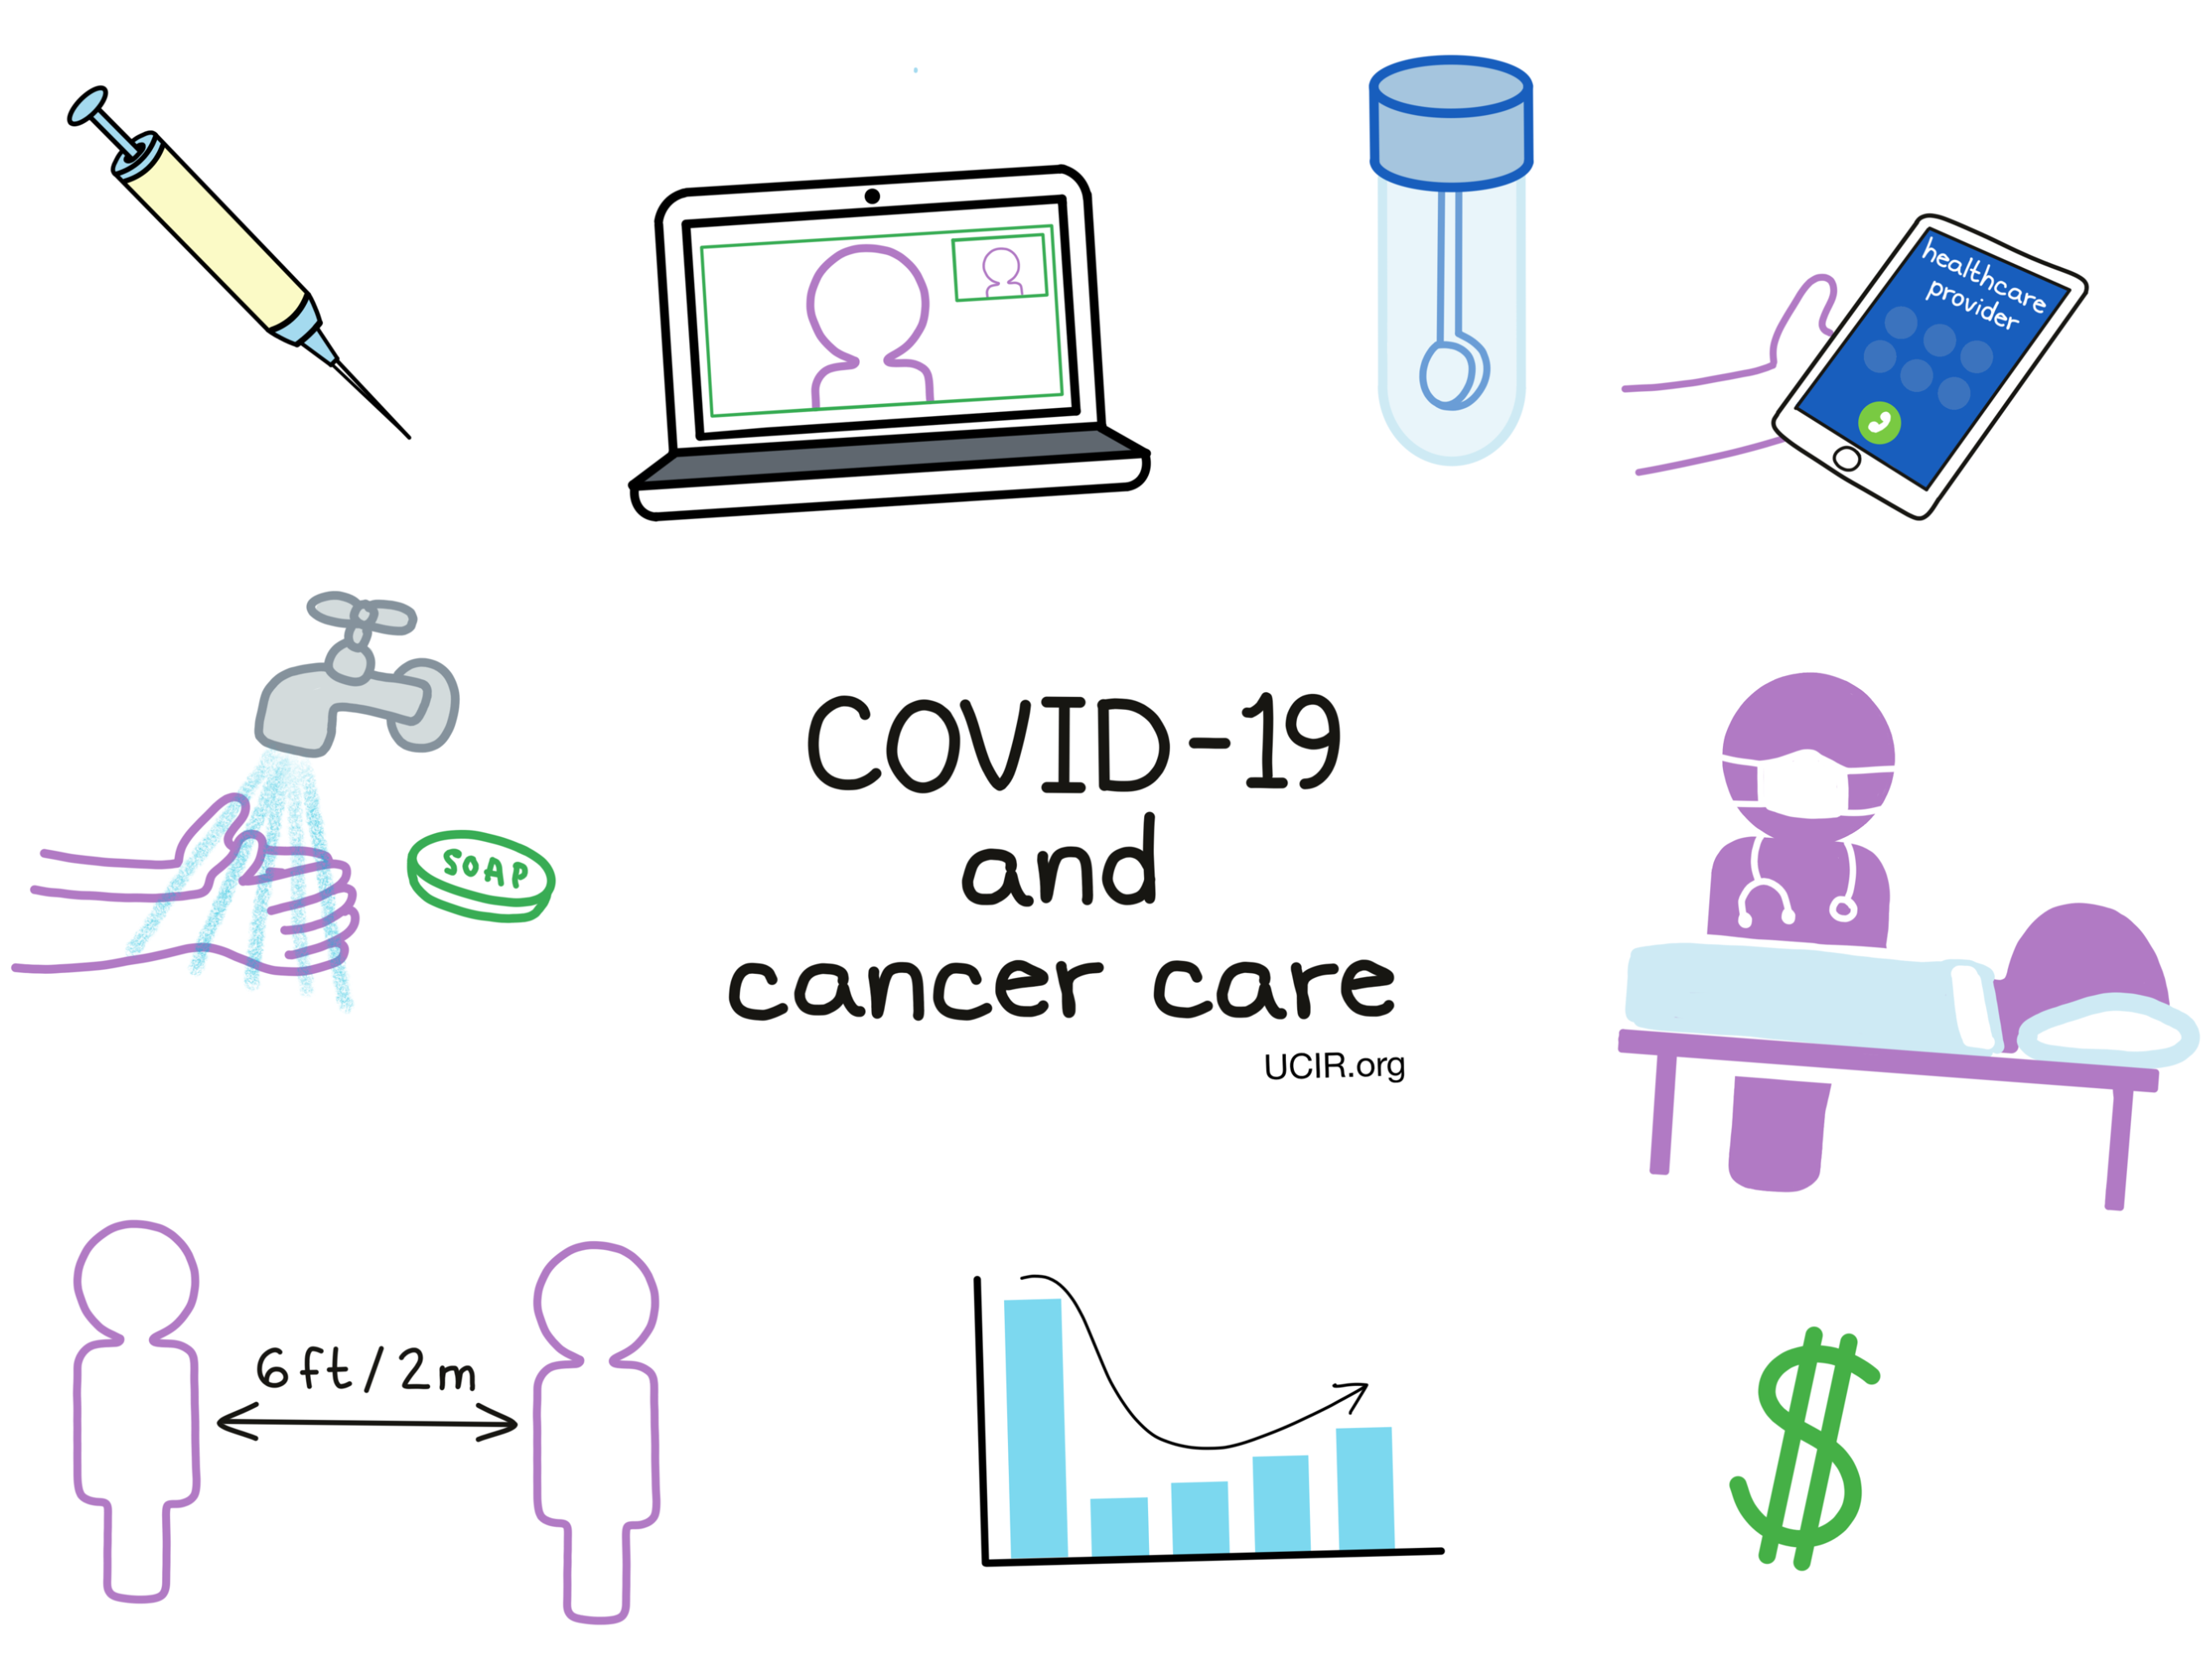 Cancer care in the age of COVID-19